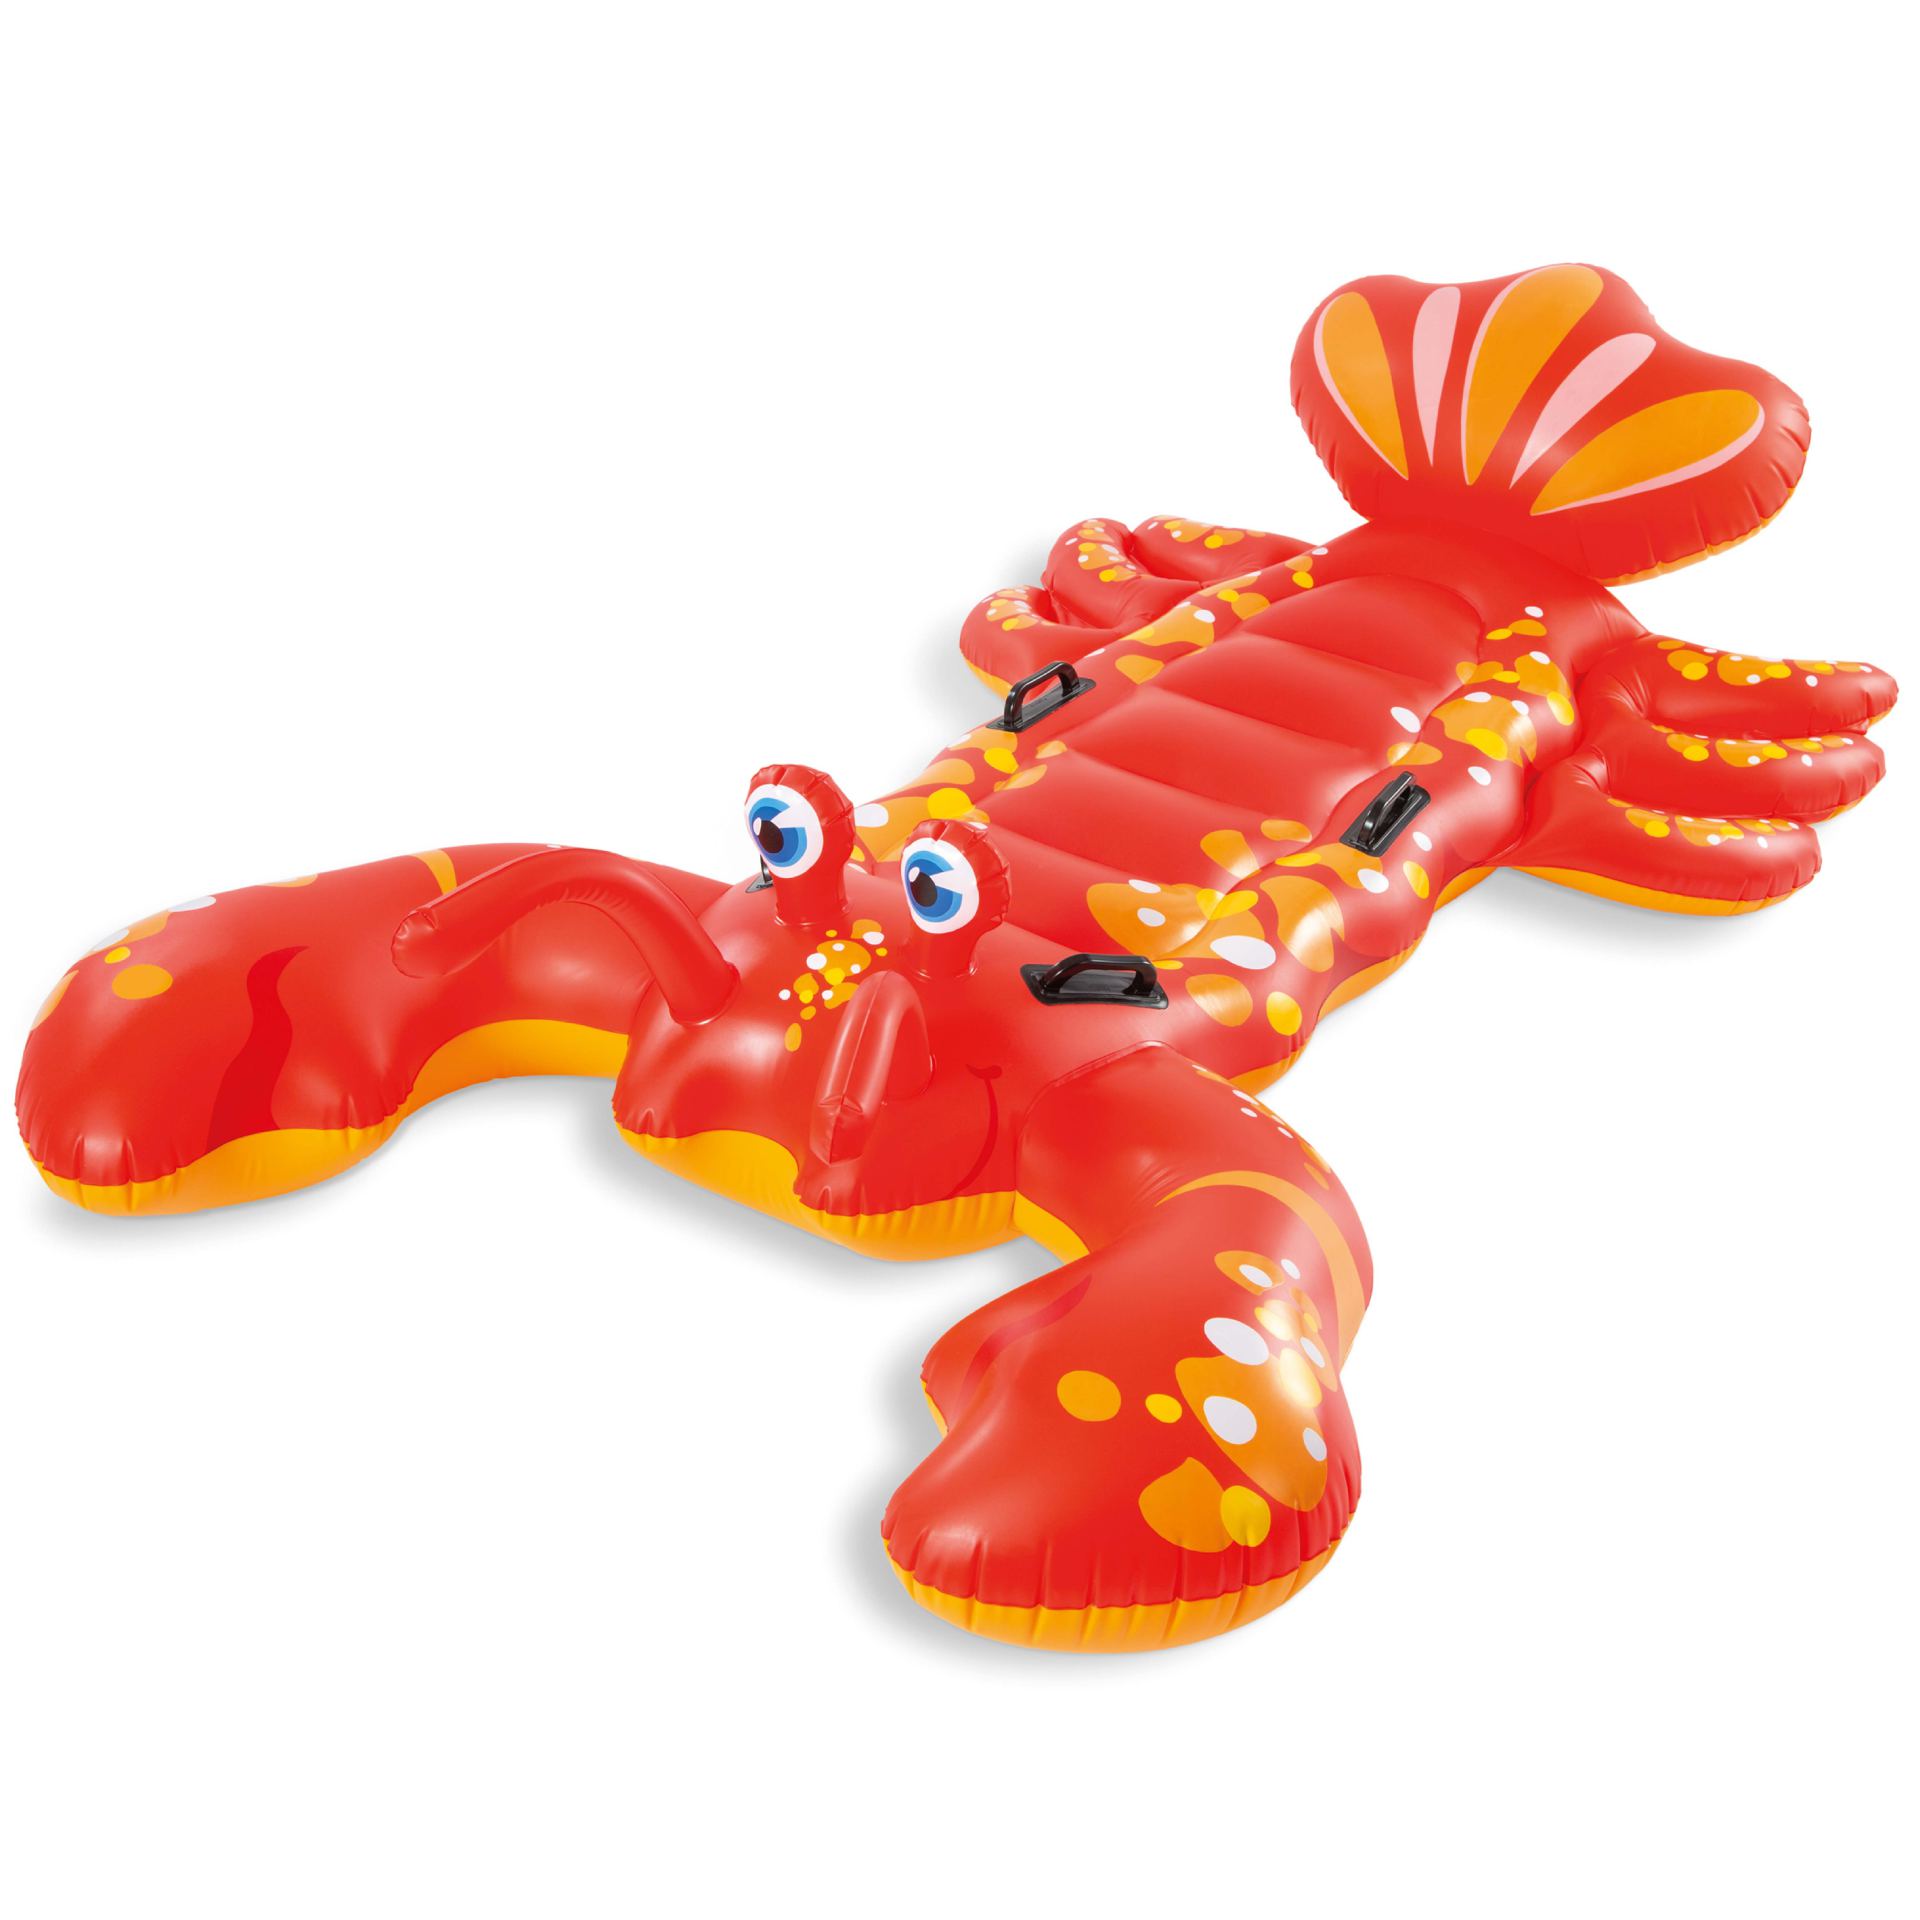 Intex giant lobster ride-on